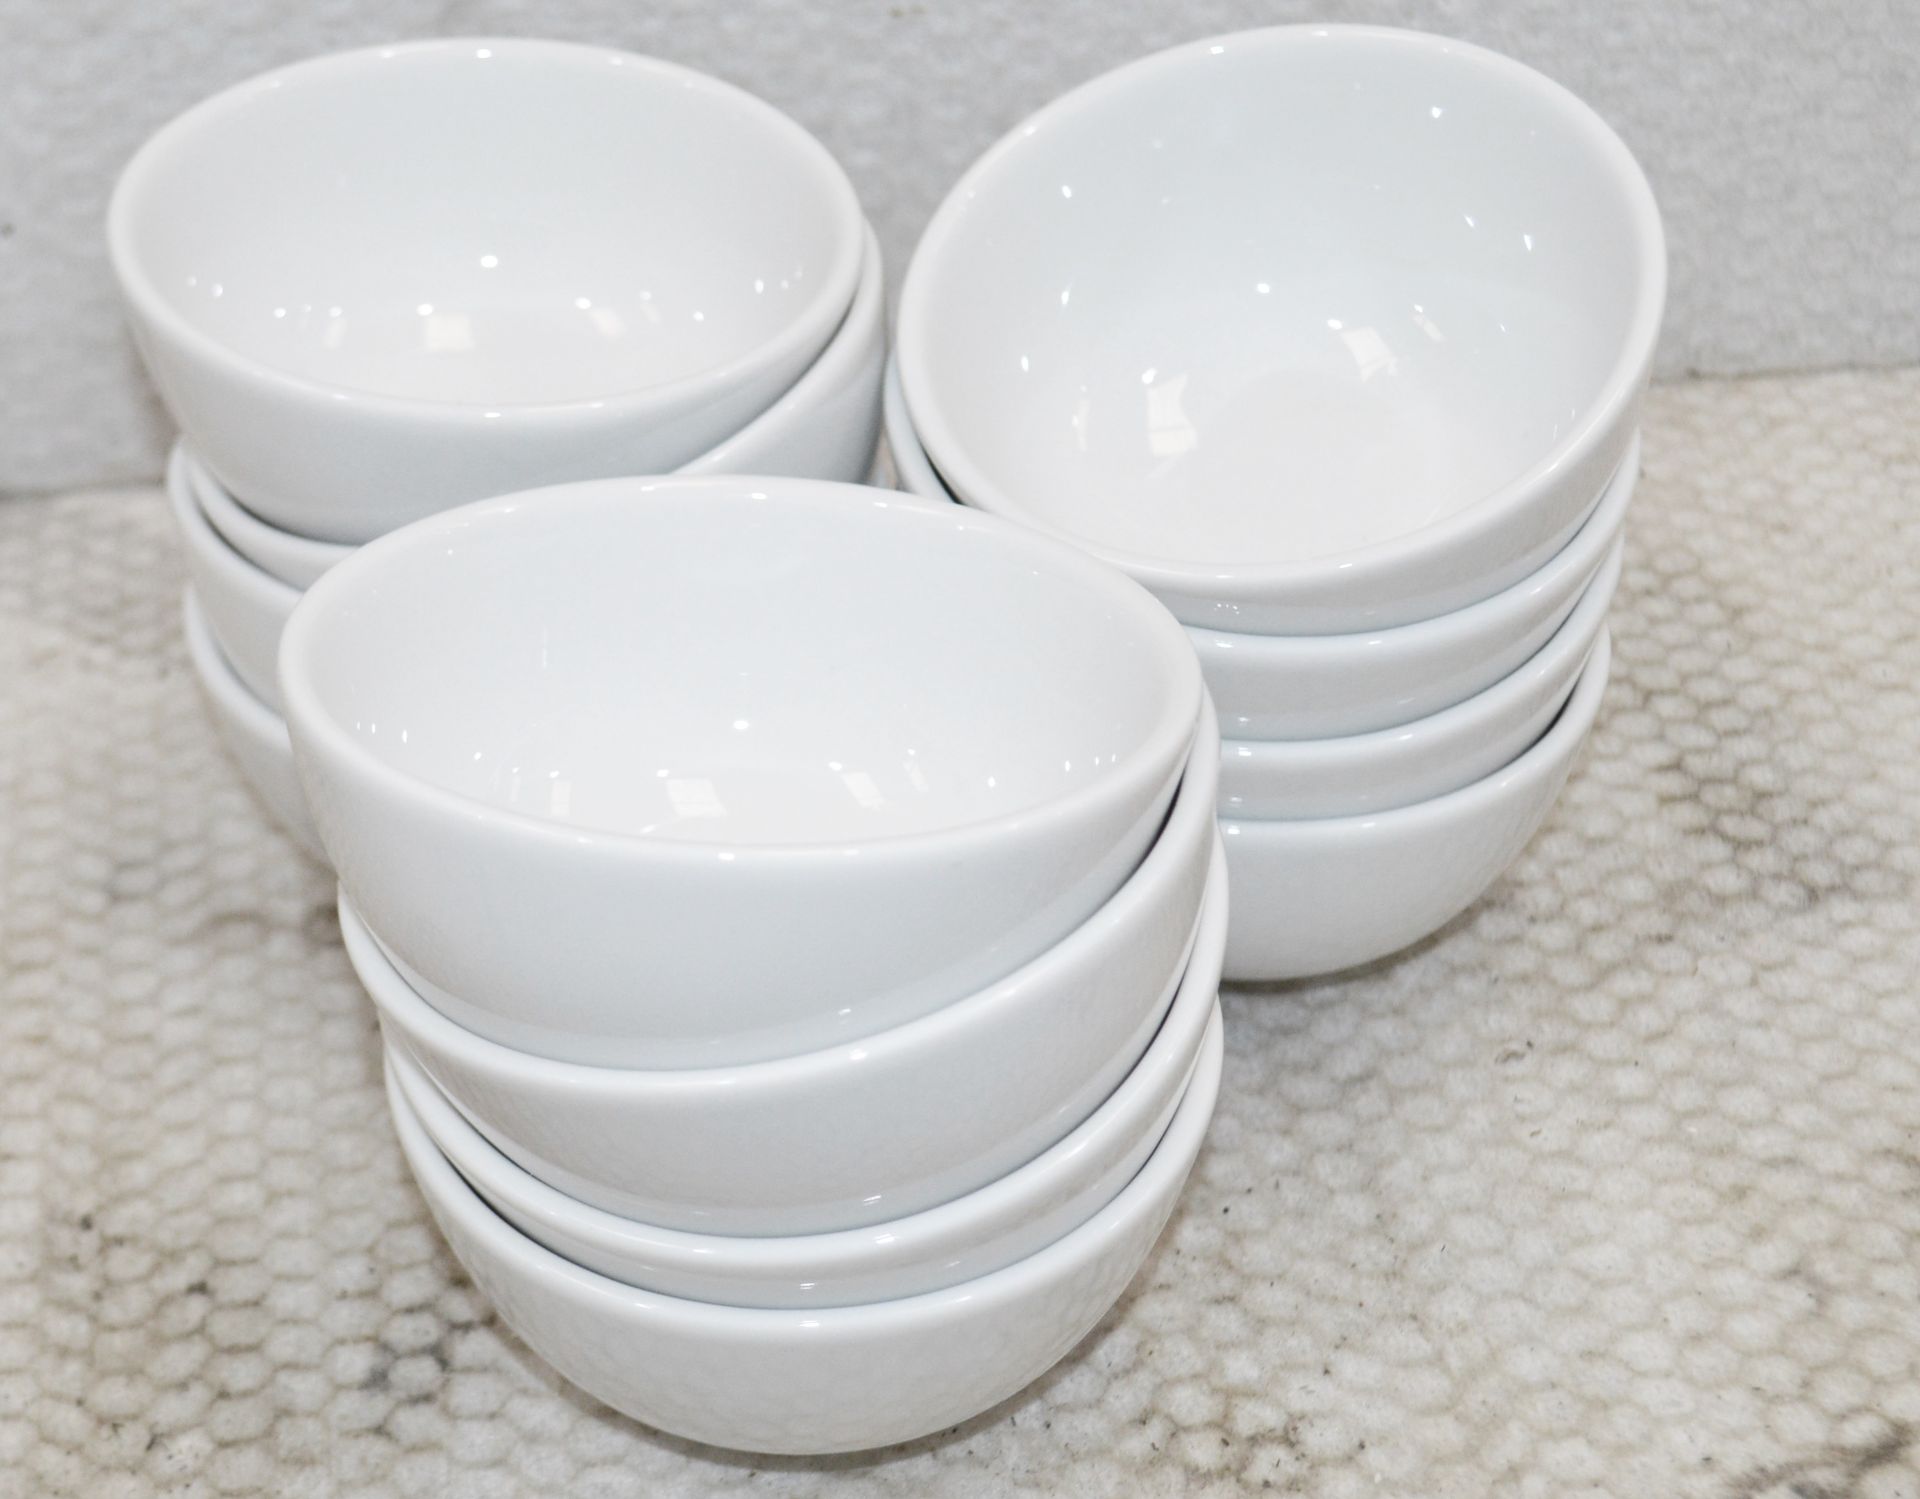 30 x Porcelite 11cm Rice Bowls - Recently Removed From A Commercial Restaurant Environment - CL011 -